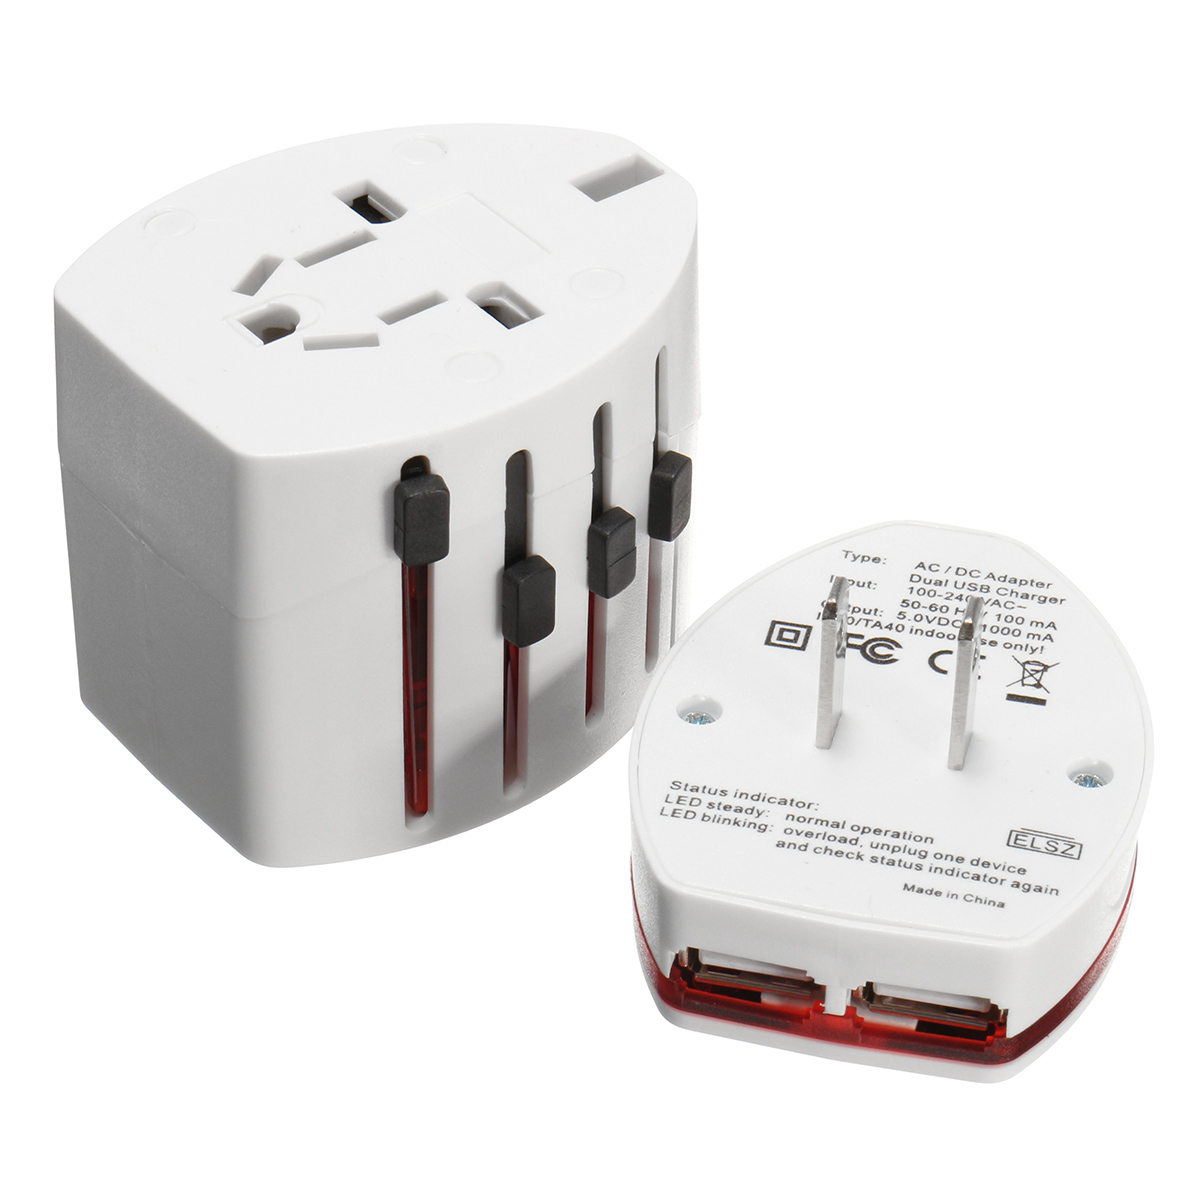 Universal-Travel-AC-Power-Charger-Adapter-Converter-AUUKUSEU-Plug-with-2-USB-Ports-1289576-5